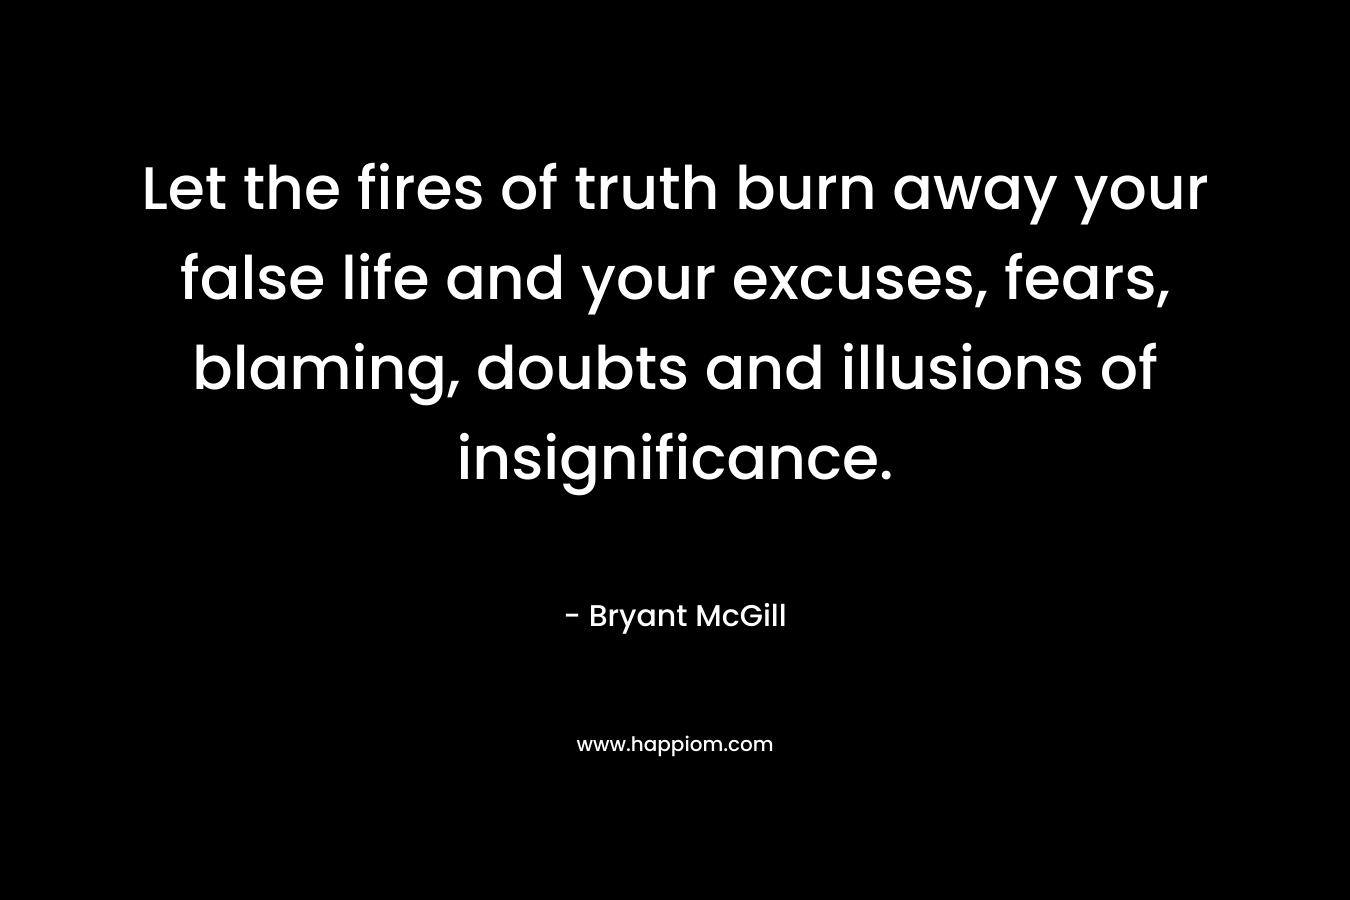 Let the fires of truth burn away your false life and your excuses, fears, blaming, doubts and illusions of insignificance. – Bryant McGill